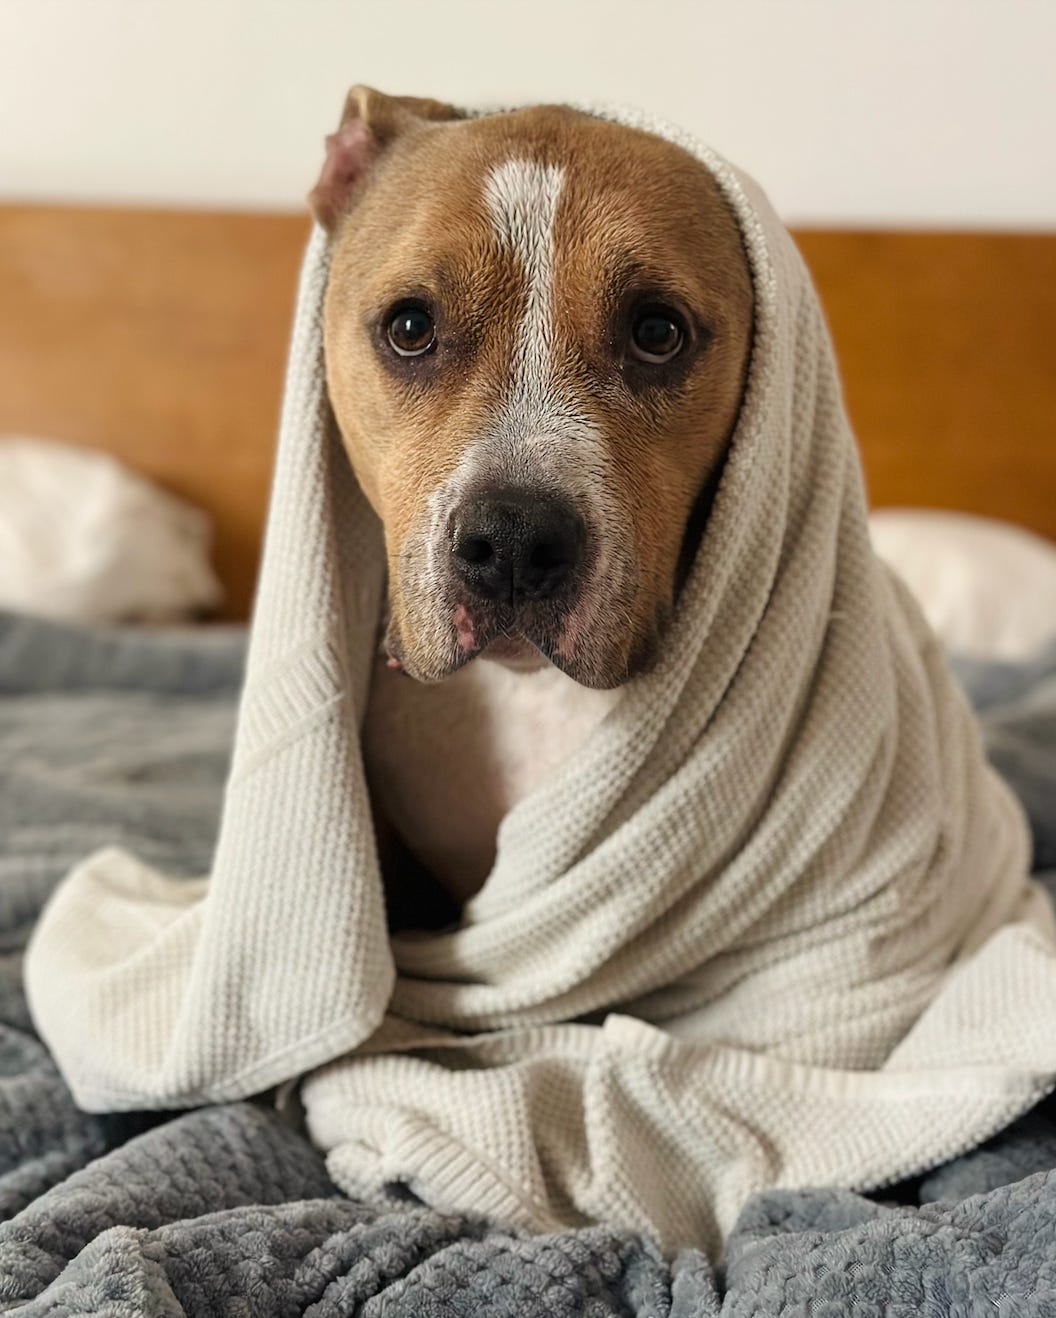 Elvis wet and wrapped in a towel while sitting on a bed